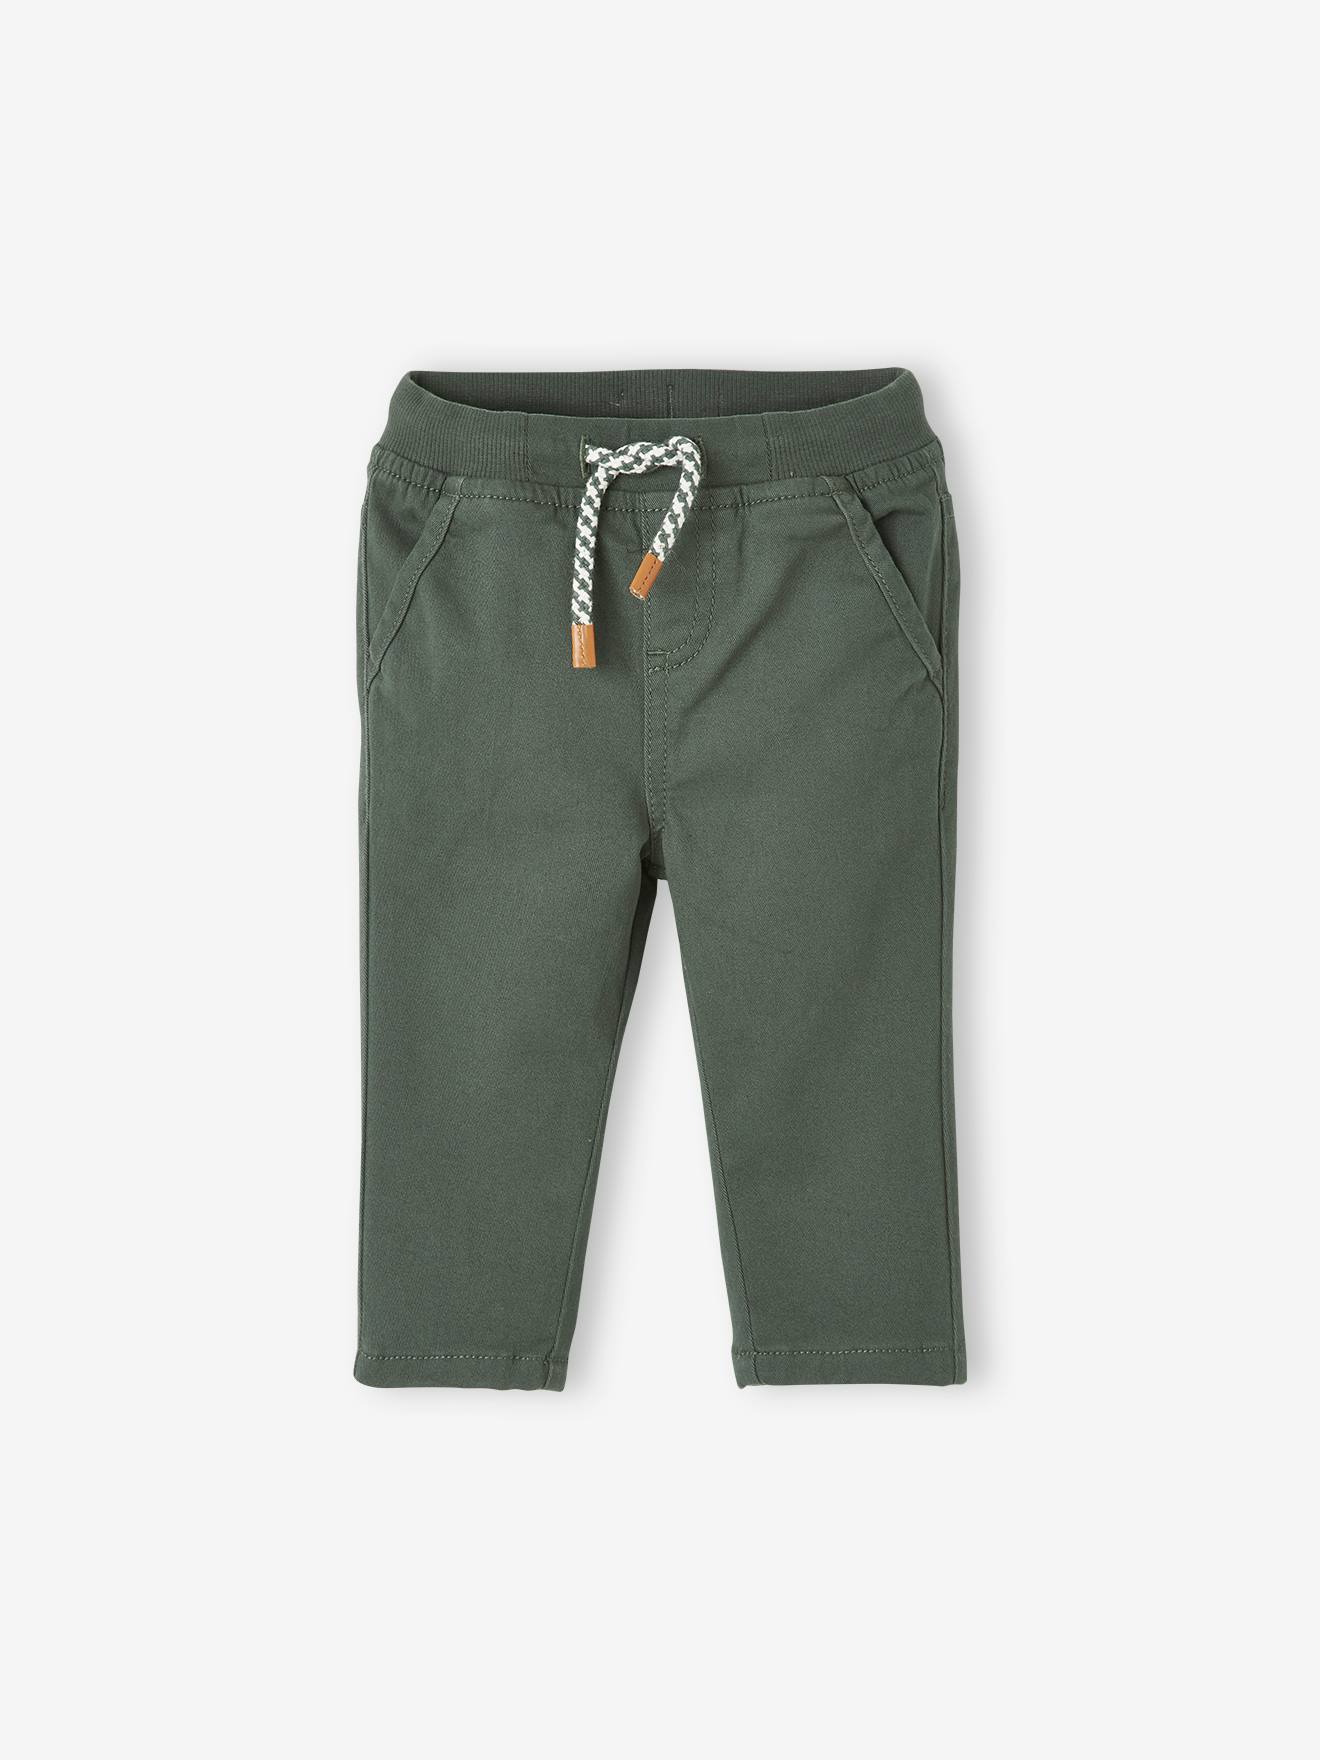 Lined Twill Trousers for Baby Boys green medium solid